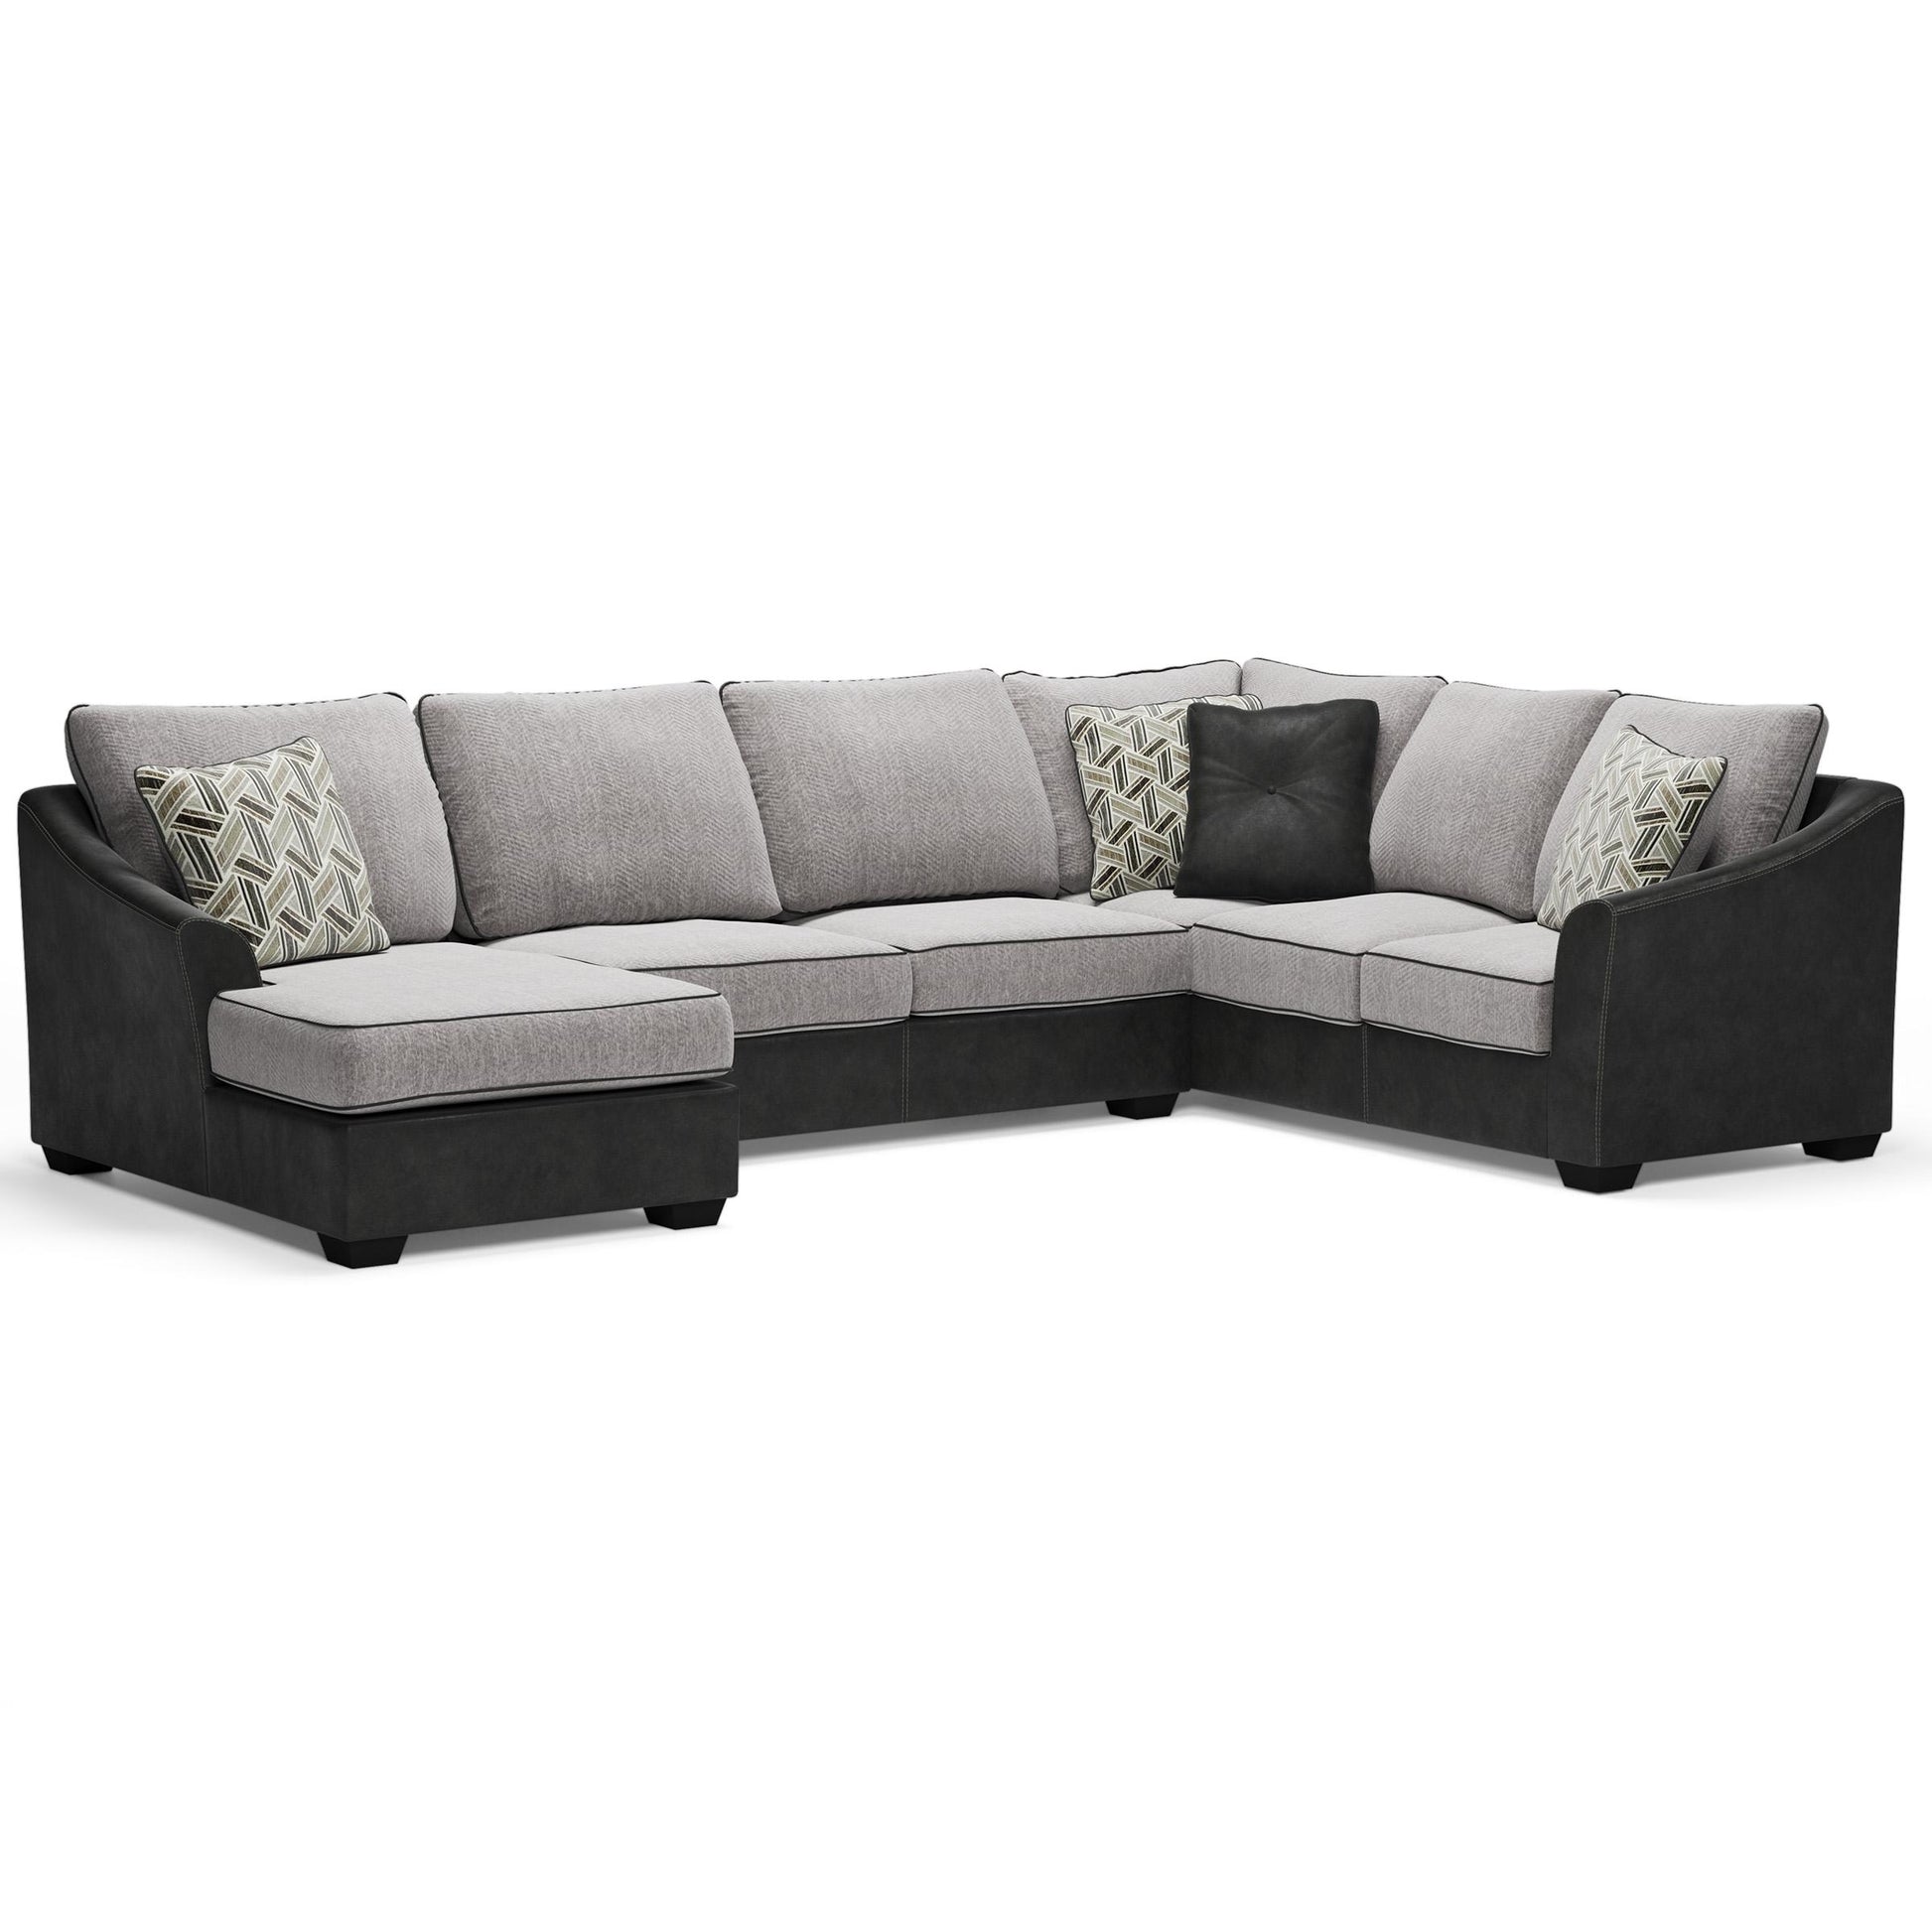 Signature Design by Ashley Bilgray Fabric and Leather Look 3 pc Sectional 5500316/5500334/5500349